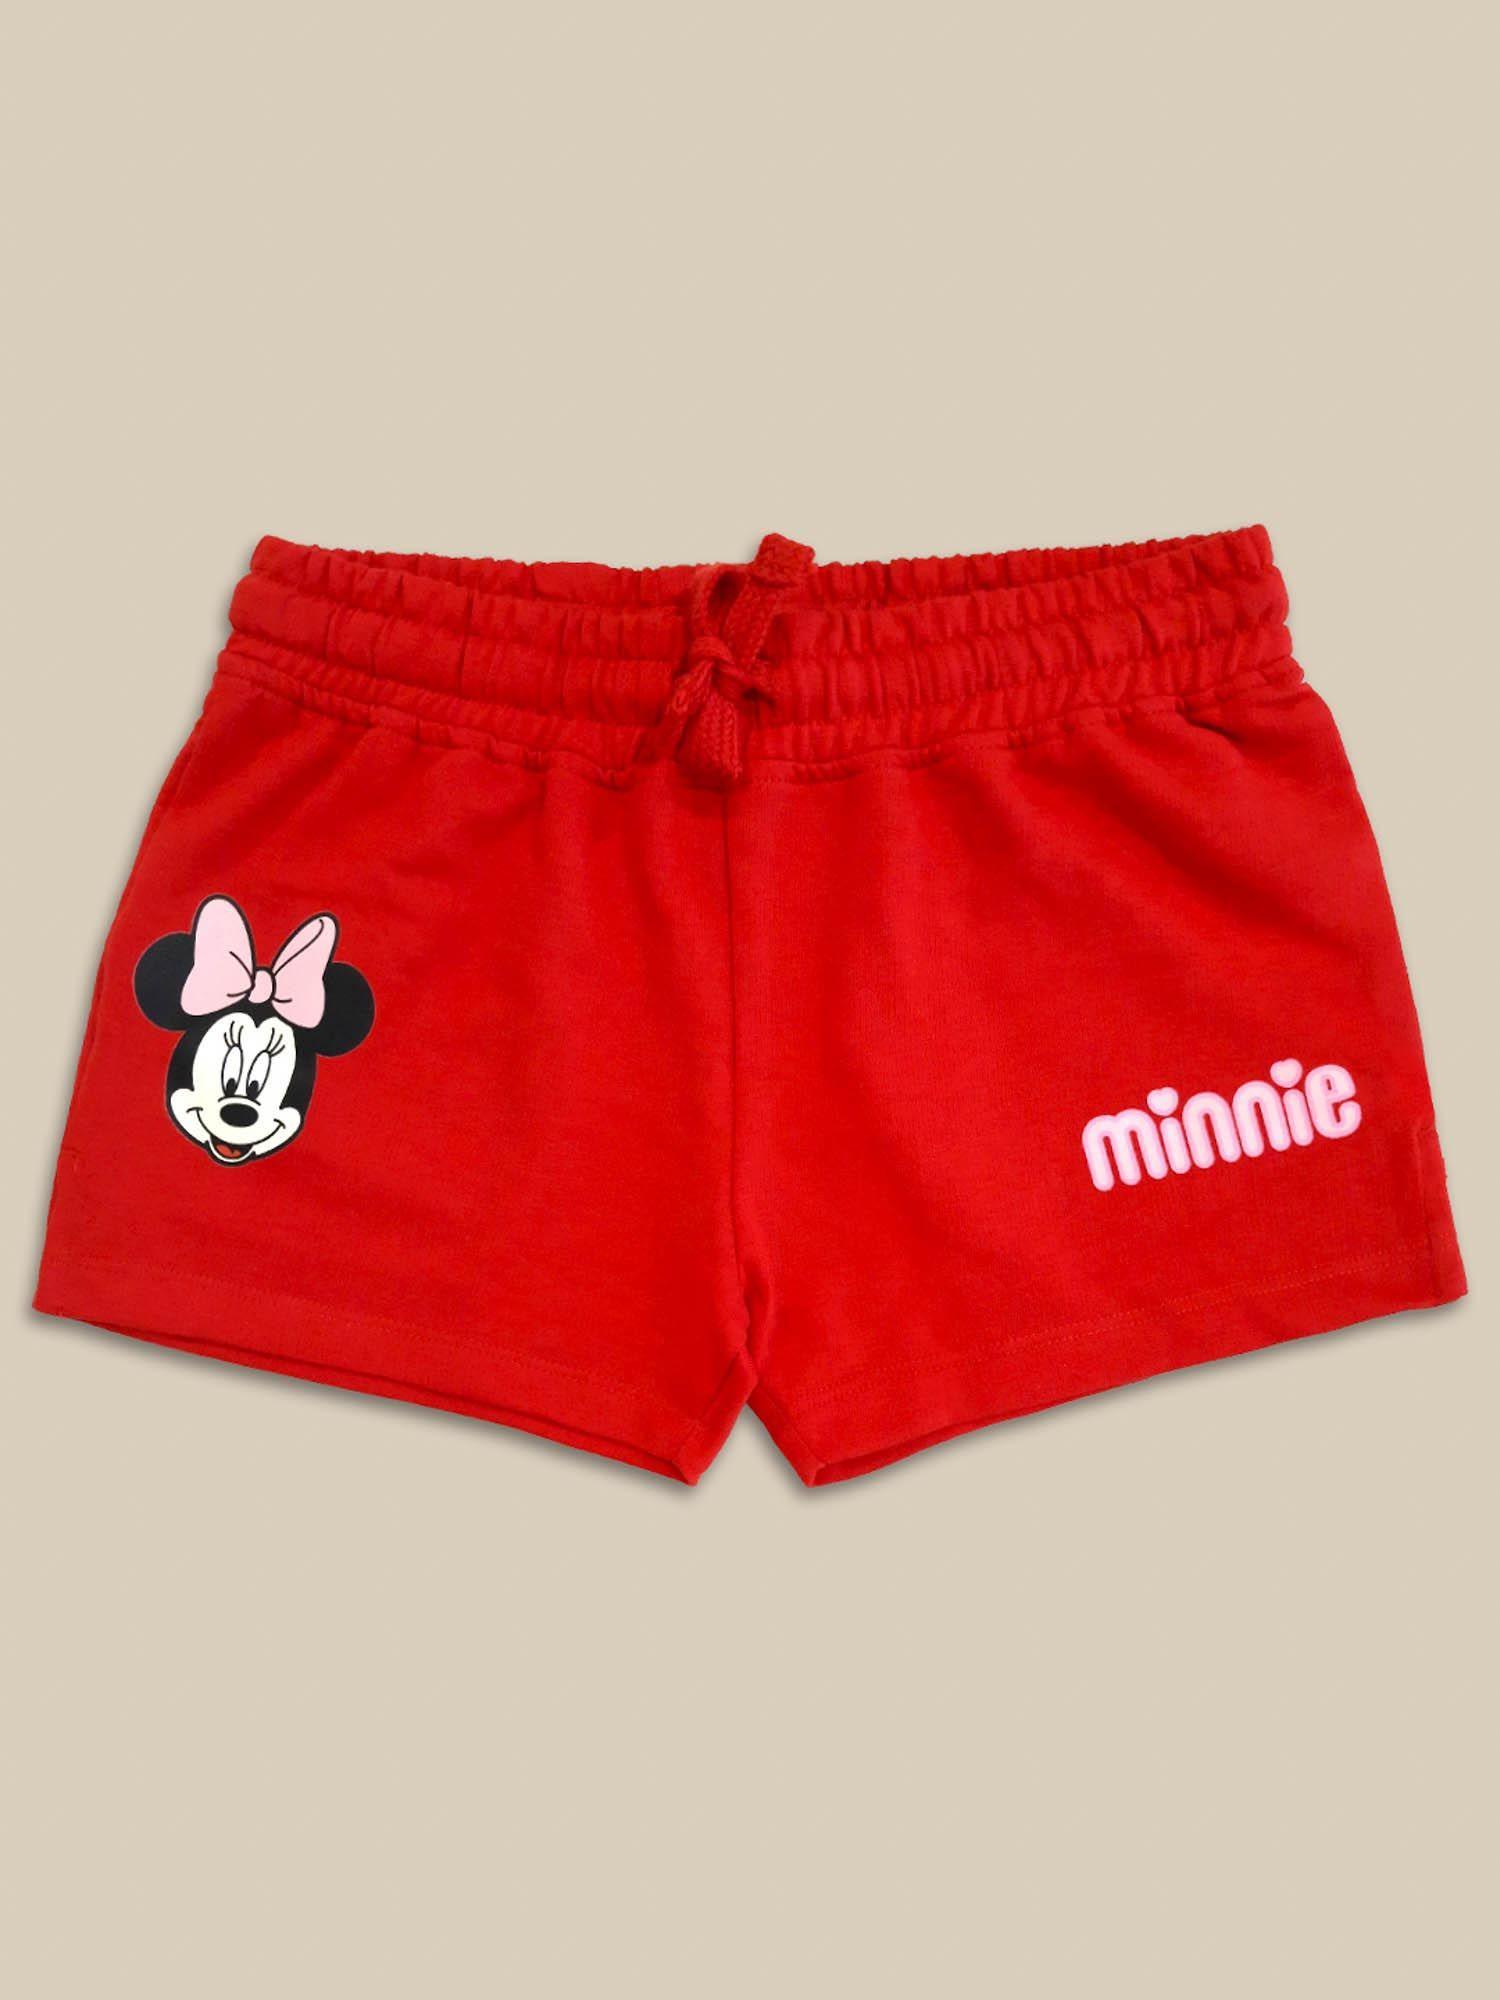 mickey-&-friends-printed-red-shorts-for-girls